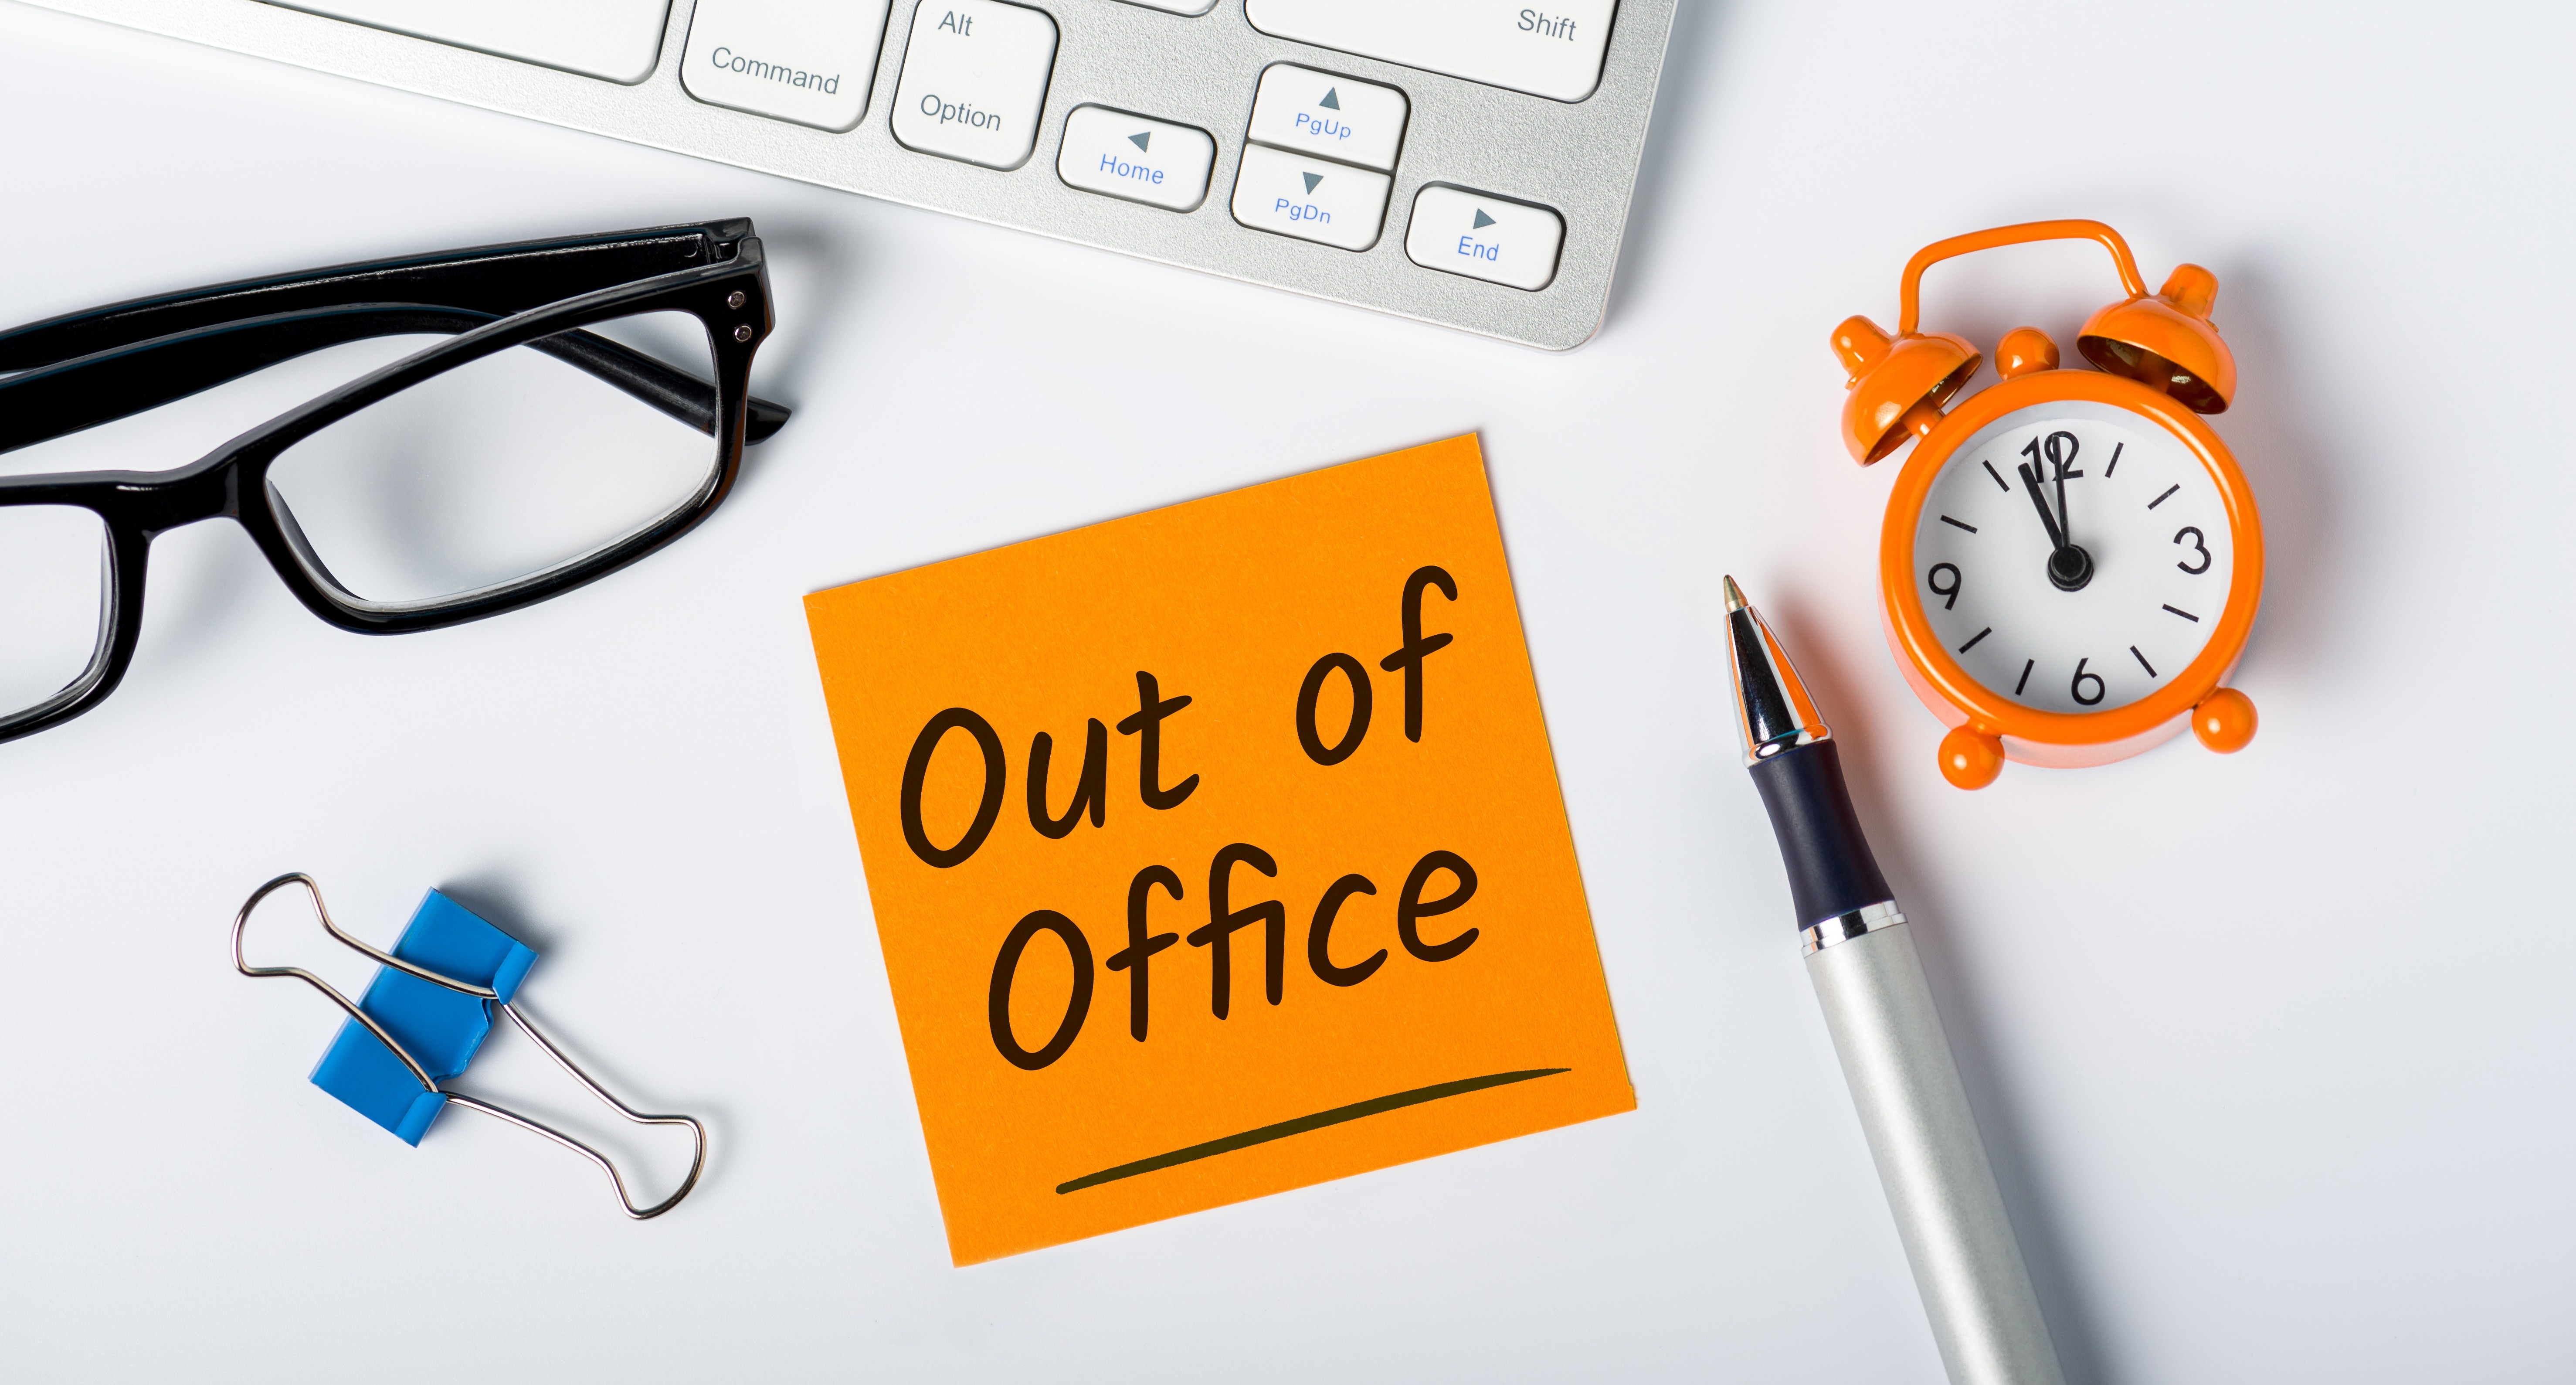 PTO (Paid Time Off) Basics & How to Effectively Manage Time Off Requests